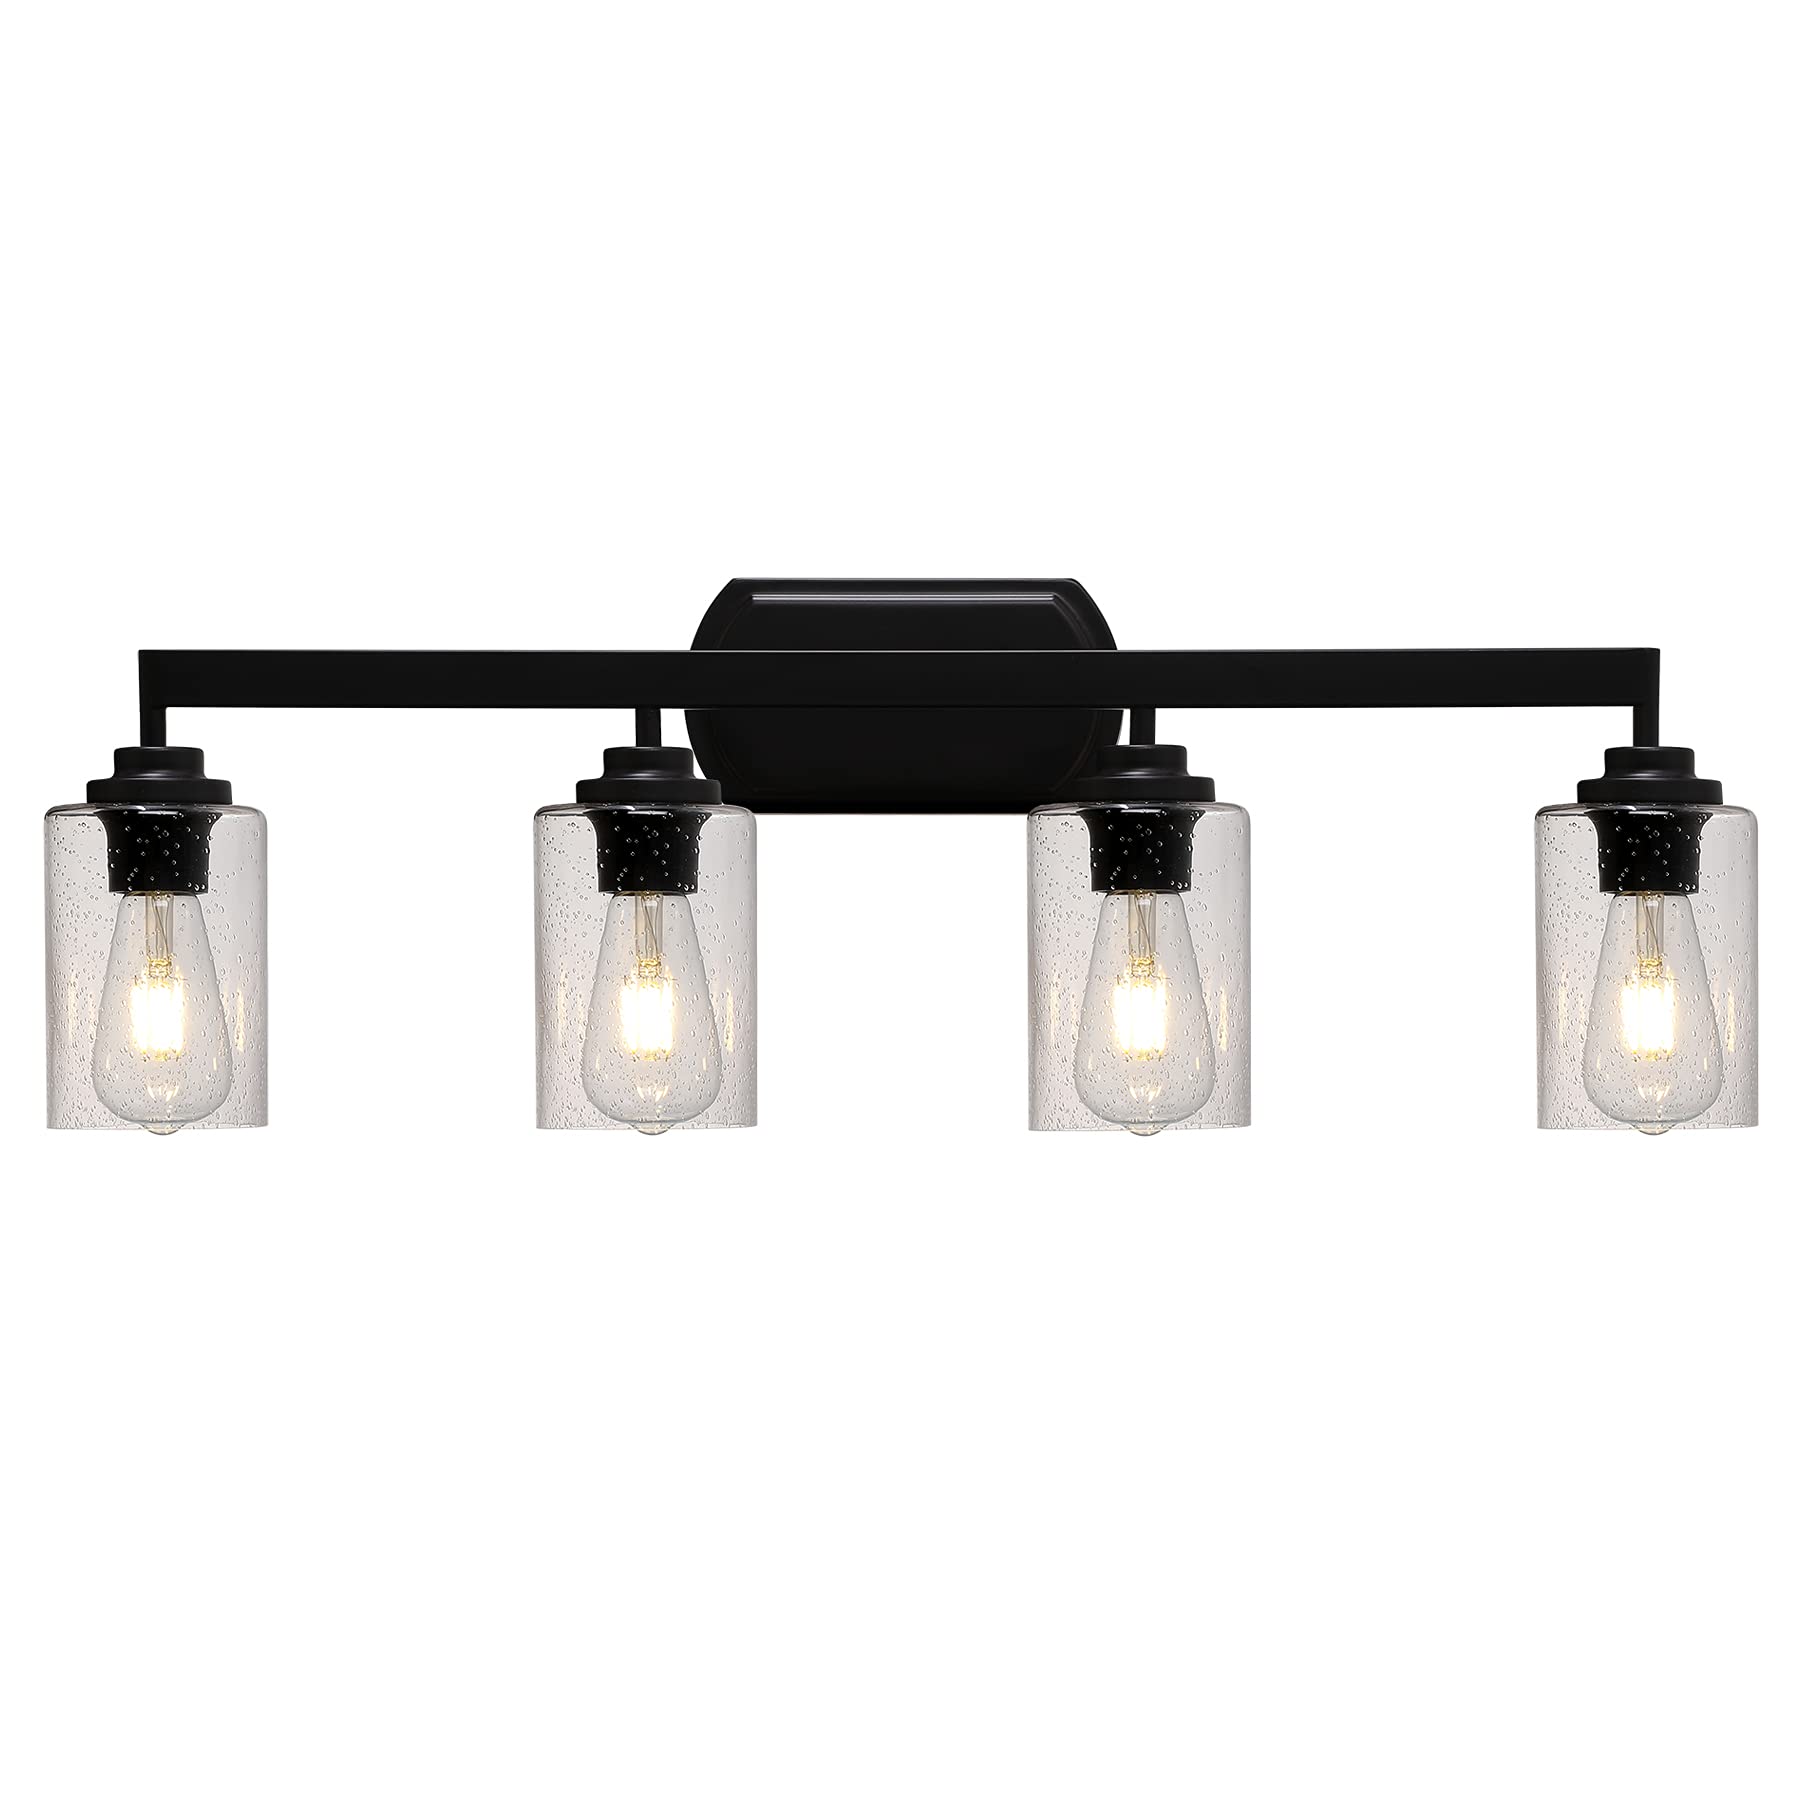 Apsekoka 4-Light Indoor Bath Vanity Light Fixtures, Farmhouse Bathroom Vanity Lights Wall Sconce Over Mirror Lamp for House Bedside Kitchen, Oil Rubbed Bronze with Seeded Glass Shade Covers